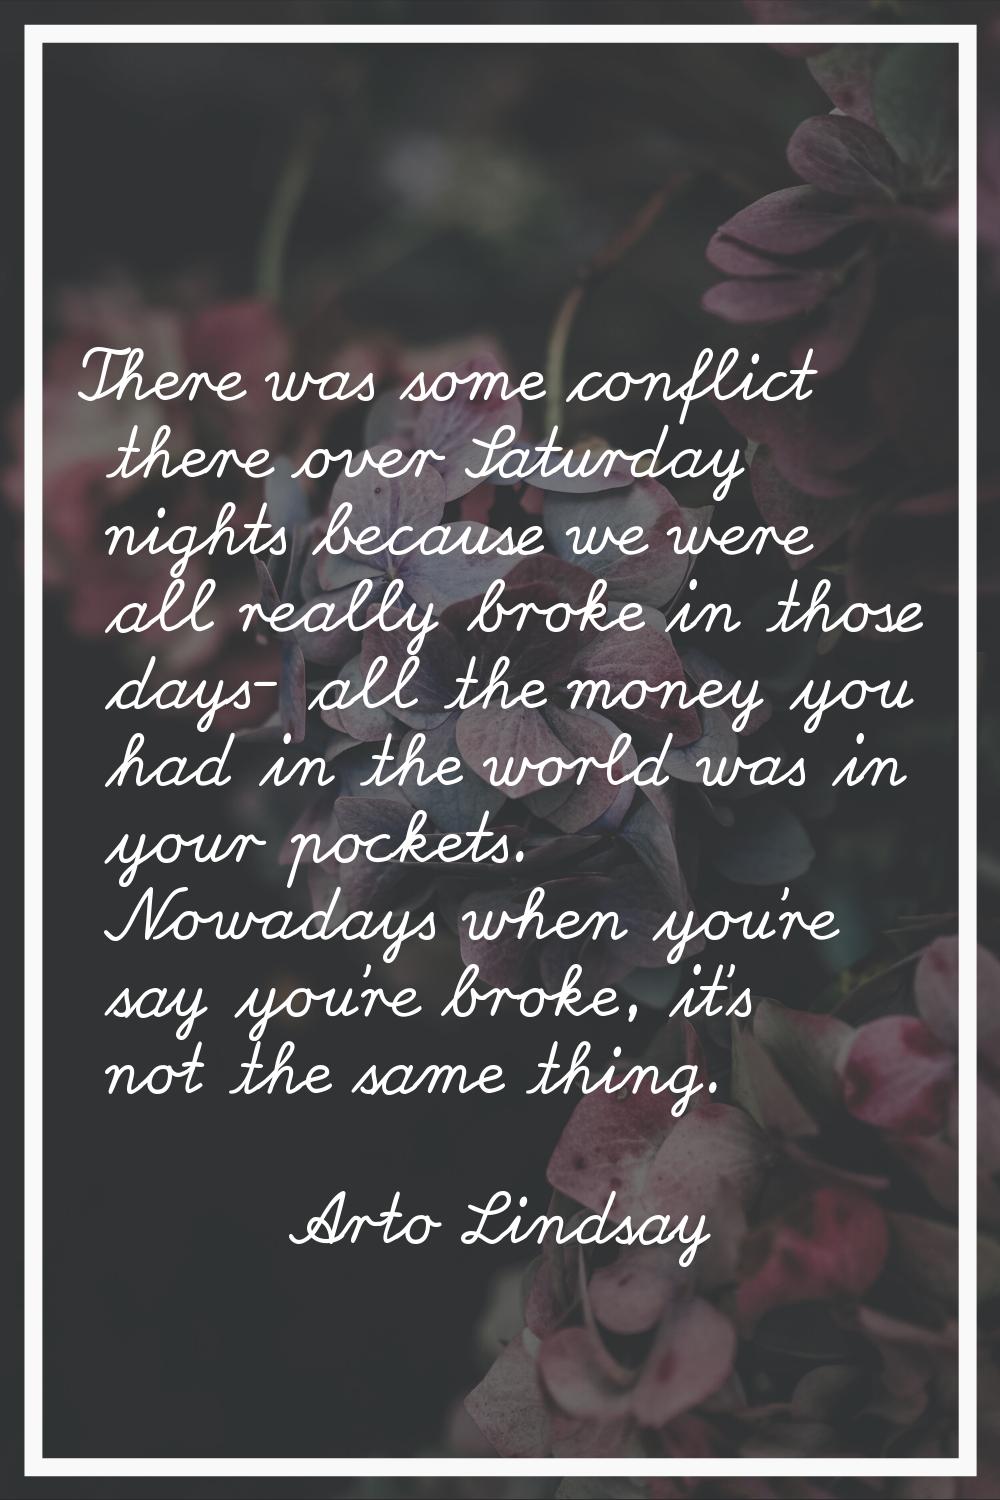 There was some conflict there over Saturday nights because we were all really broke in those days- 